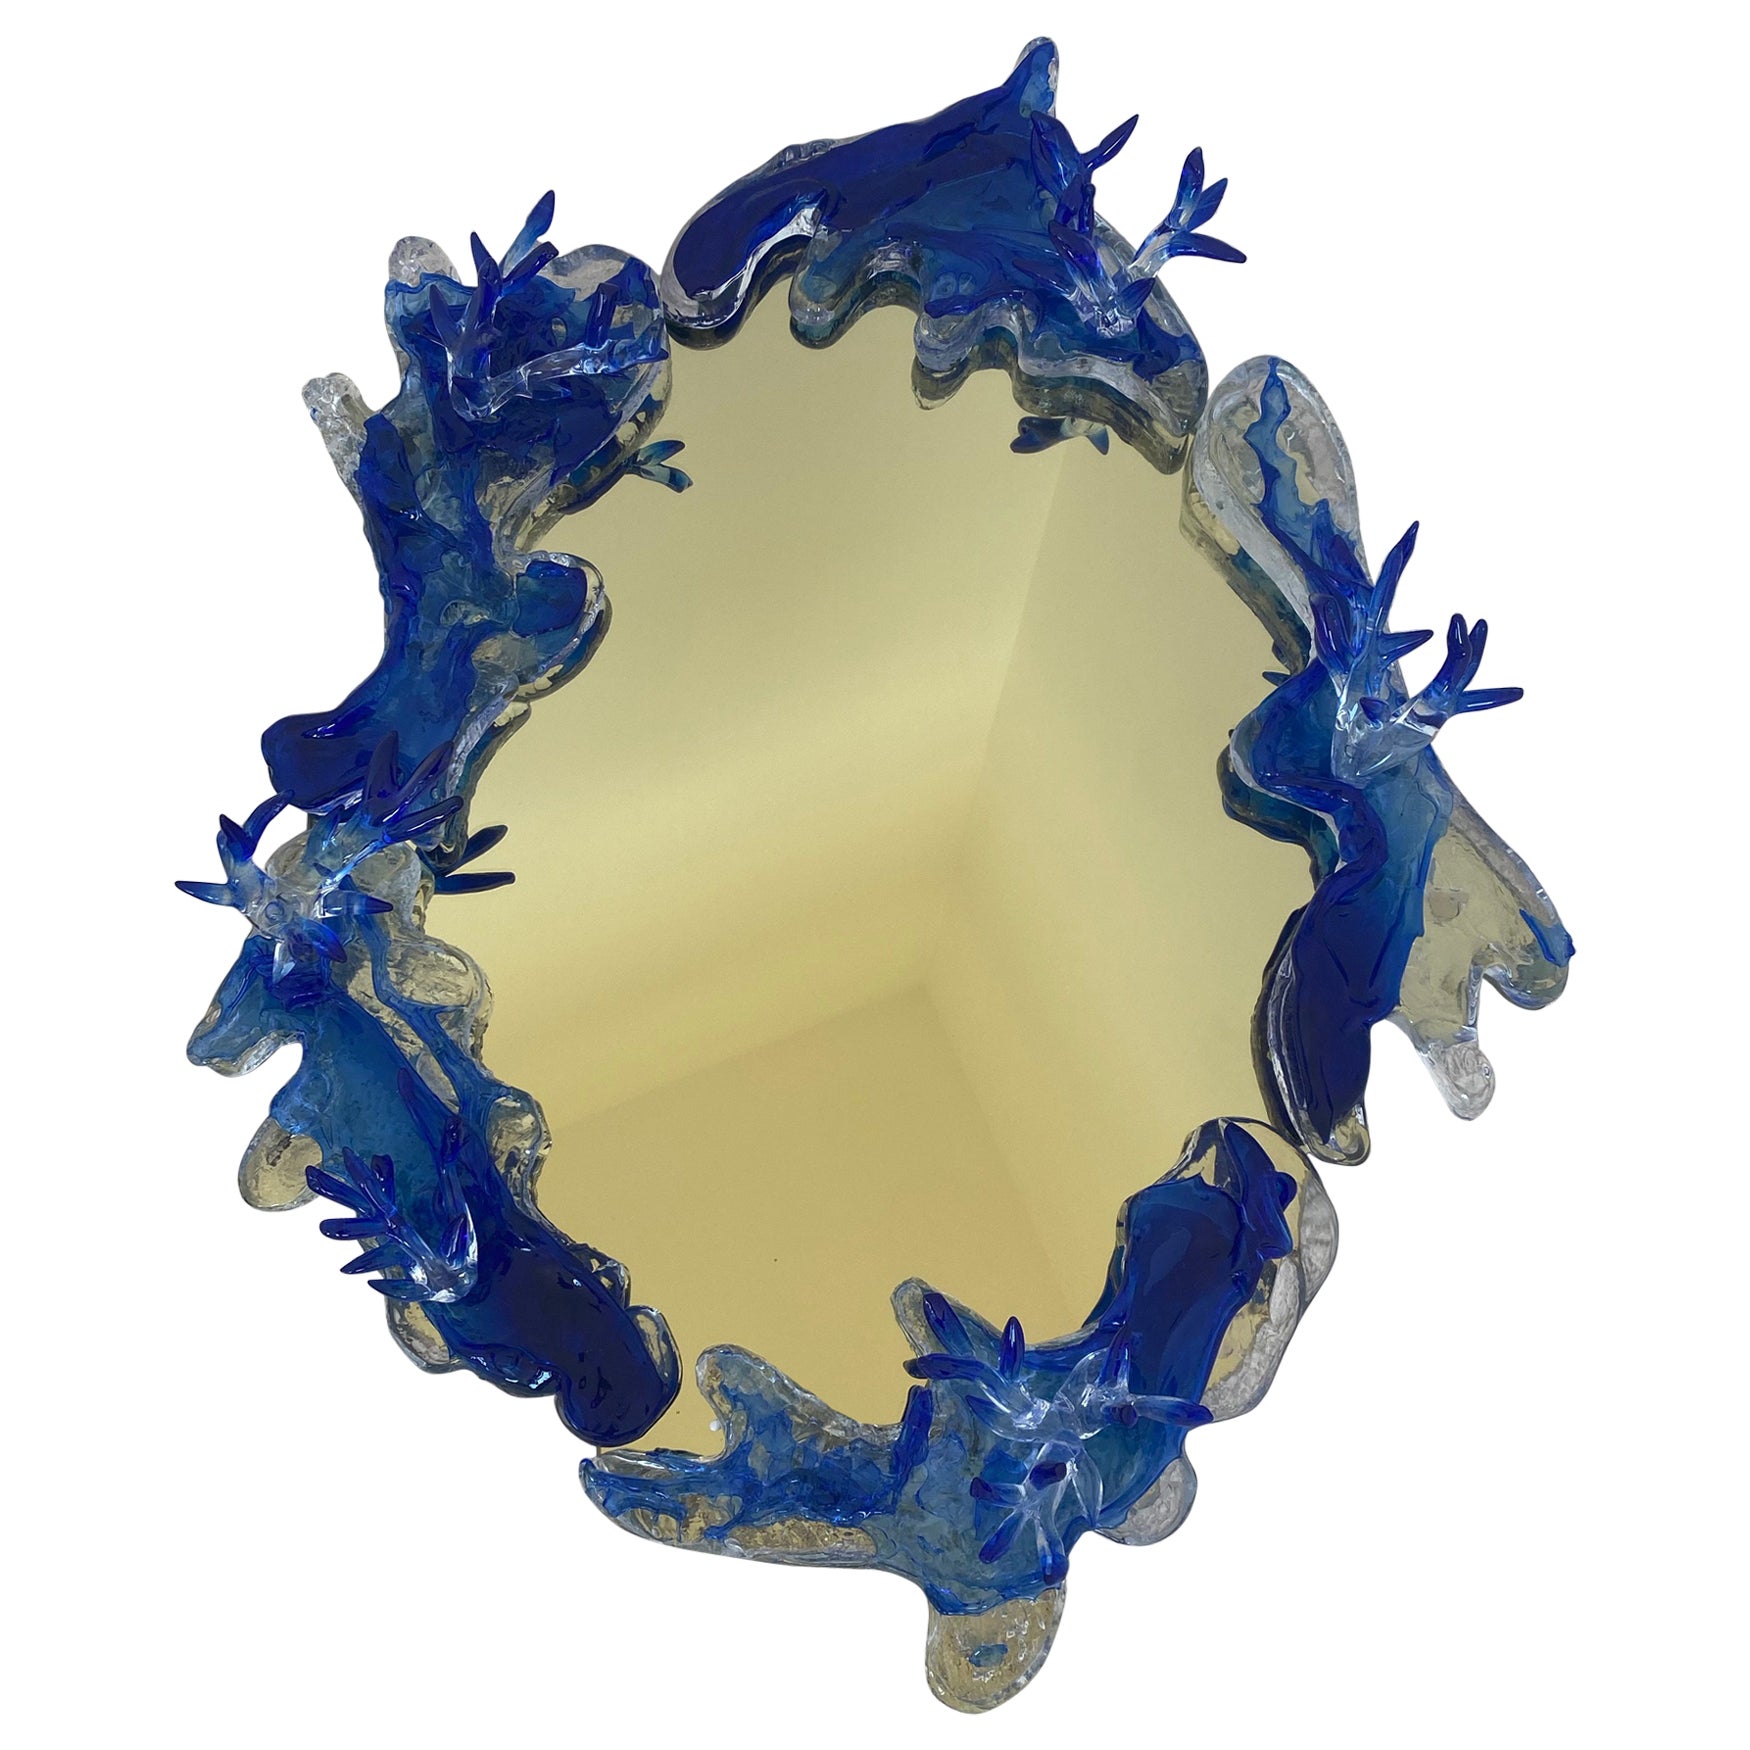 Light Gold Mirror With Ultramarine Blue Decor by Emilie Lemardeley